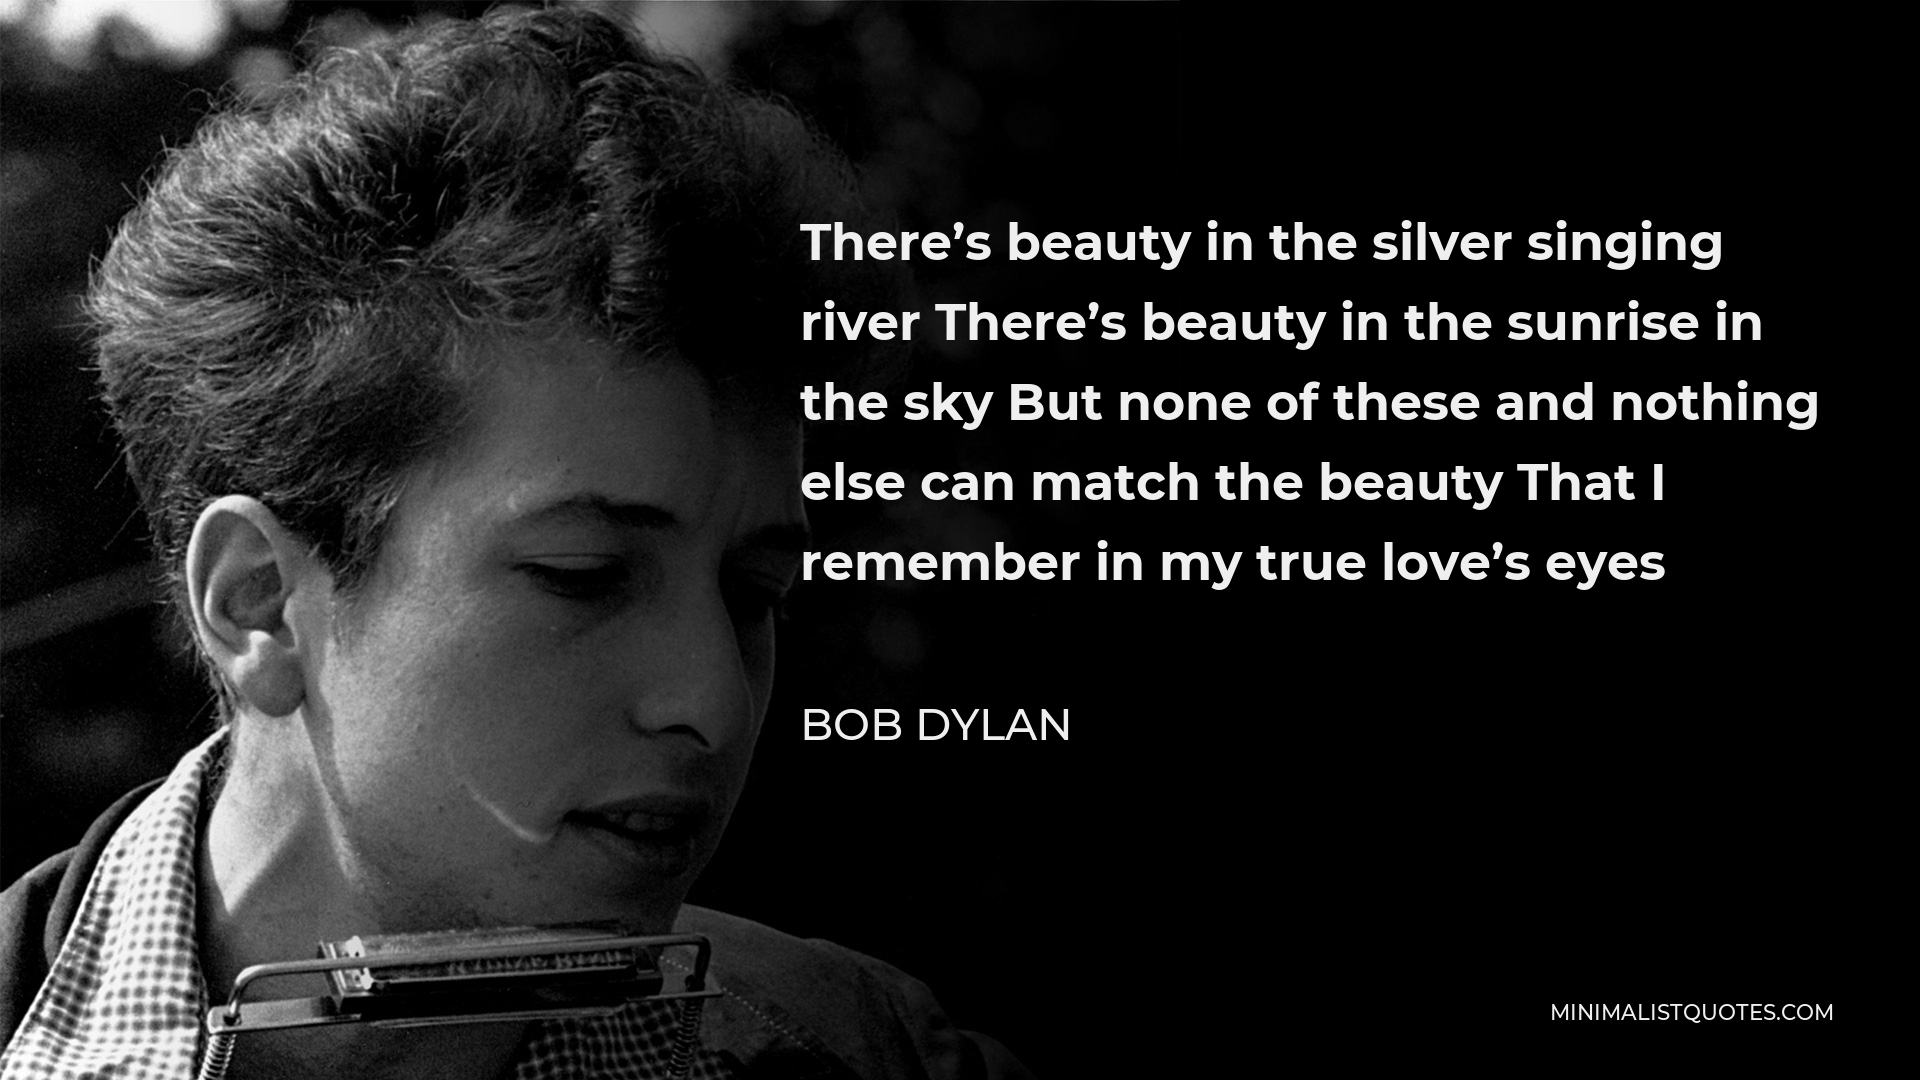 Bob Dylan Quote - There’s beauty in the silver singing river There’s beauty in the sunrise in the sky But none of these and nothing else can match the beauty That I remember in my true love’s eyes